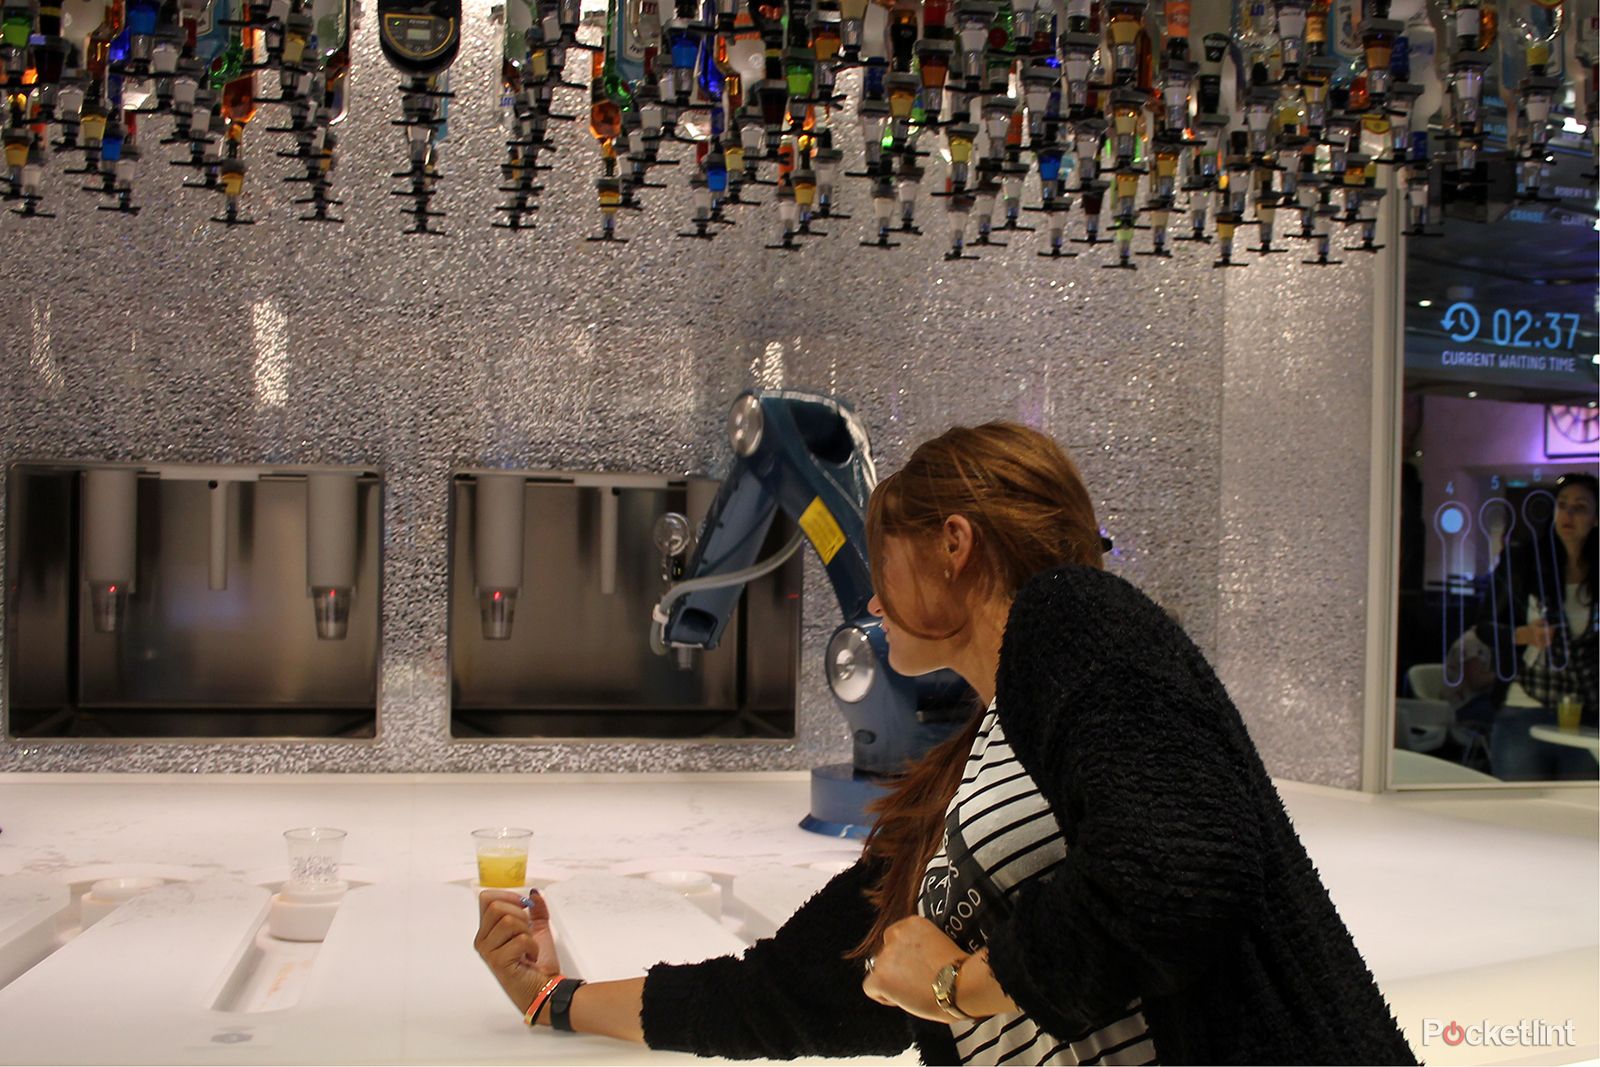 bionic bar is the future robot bartenders at your service image 7